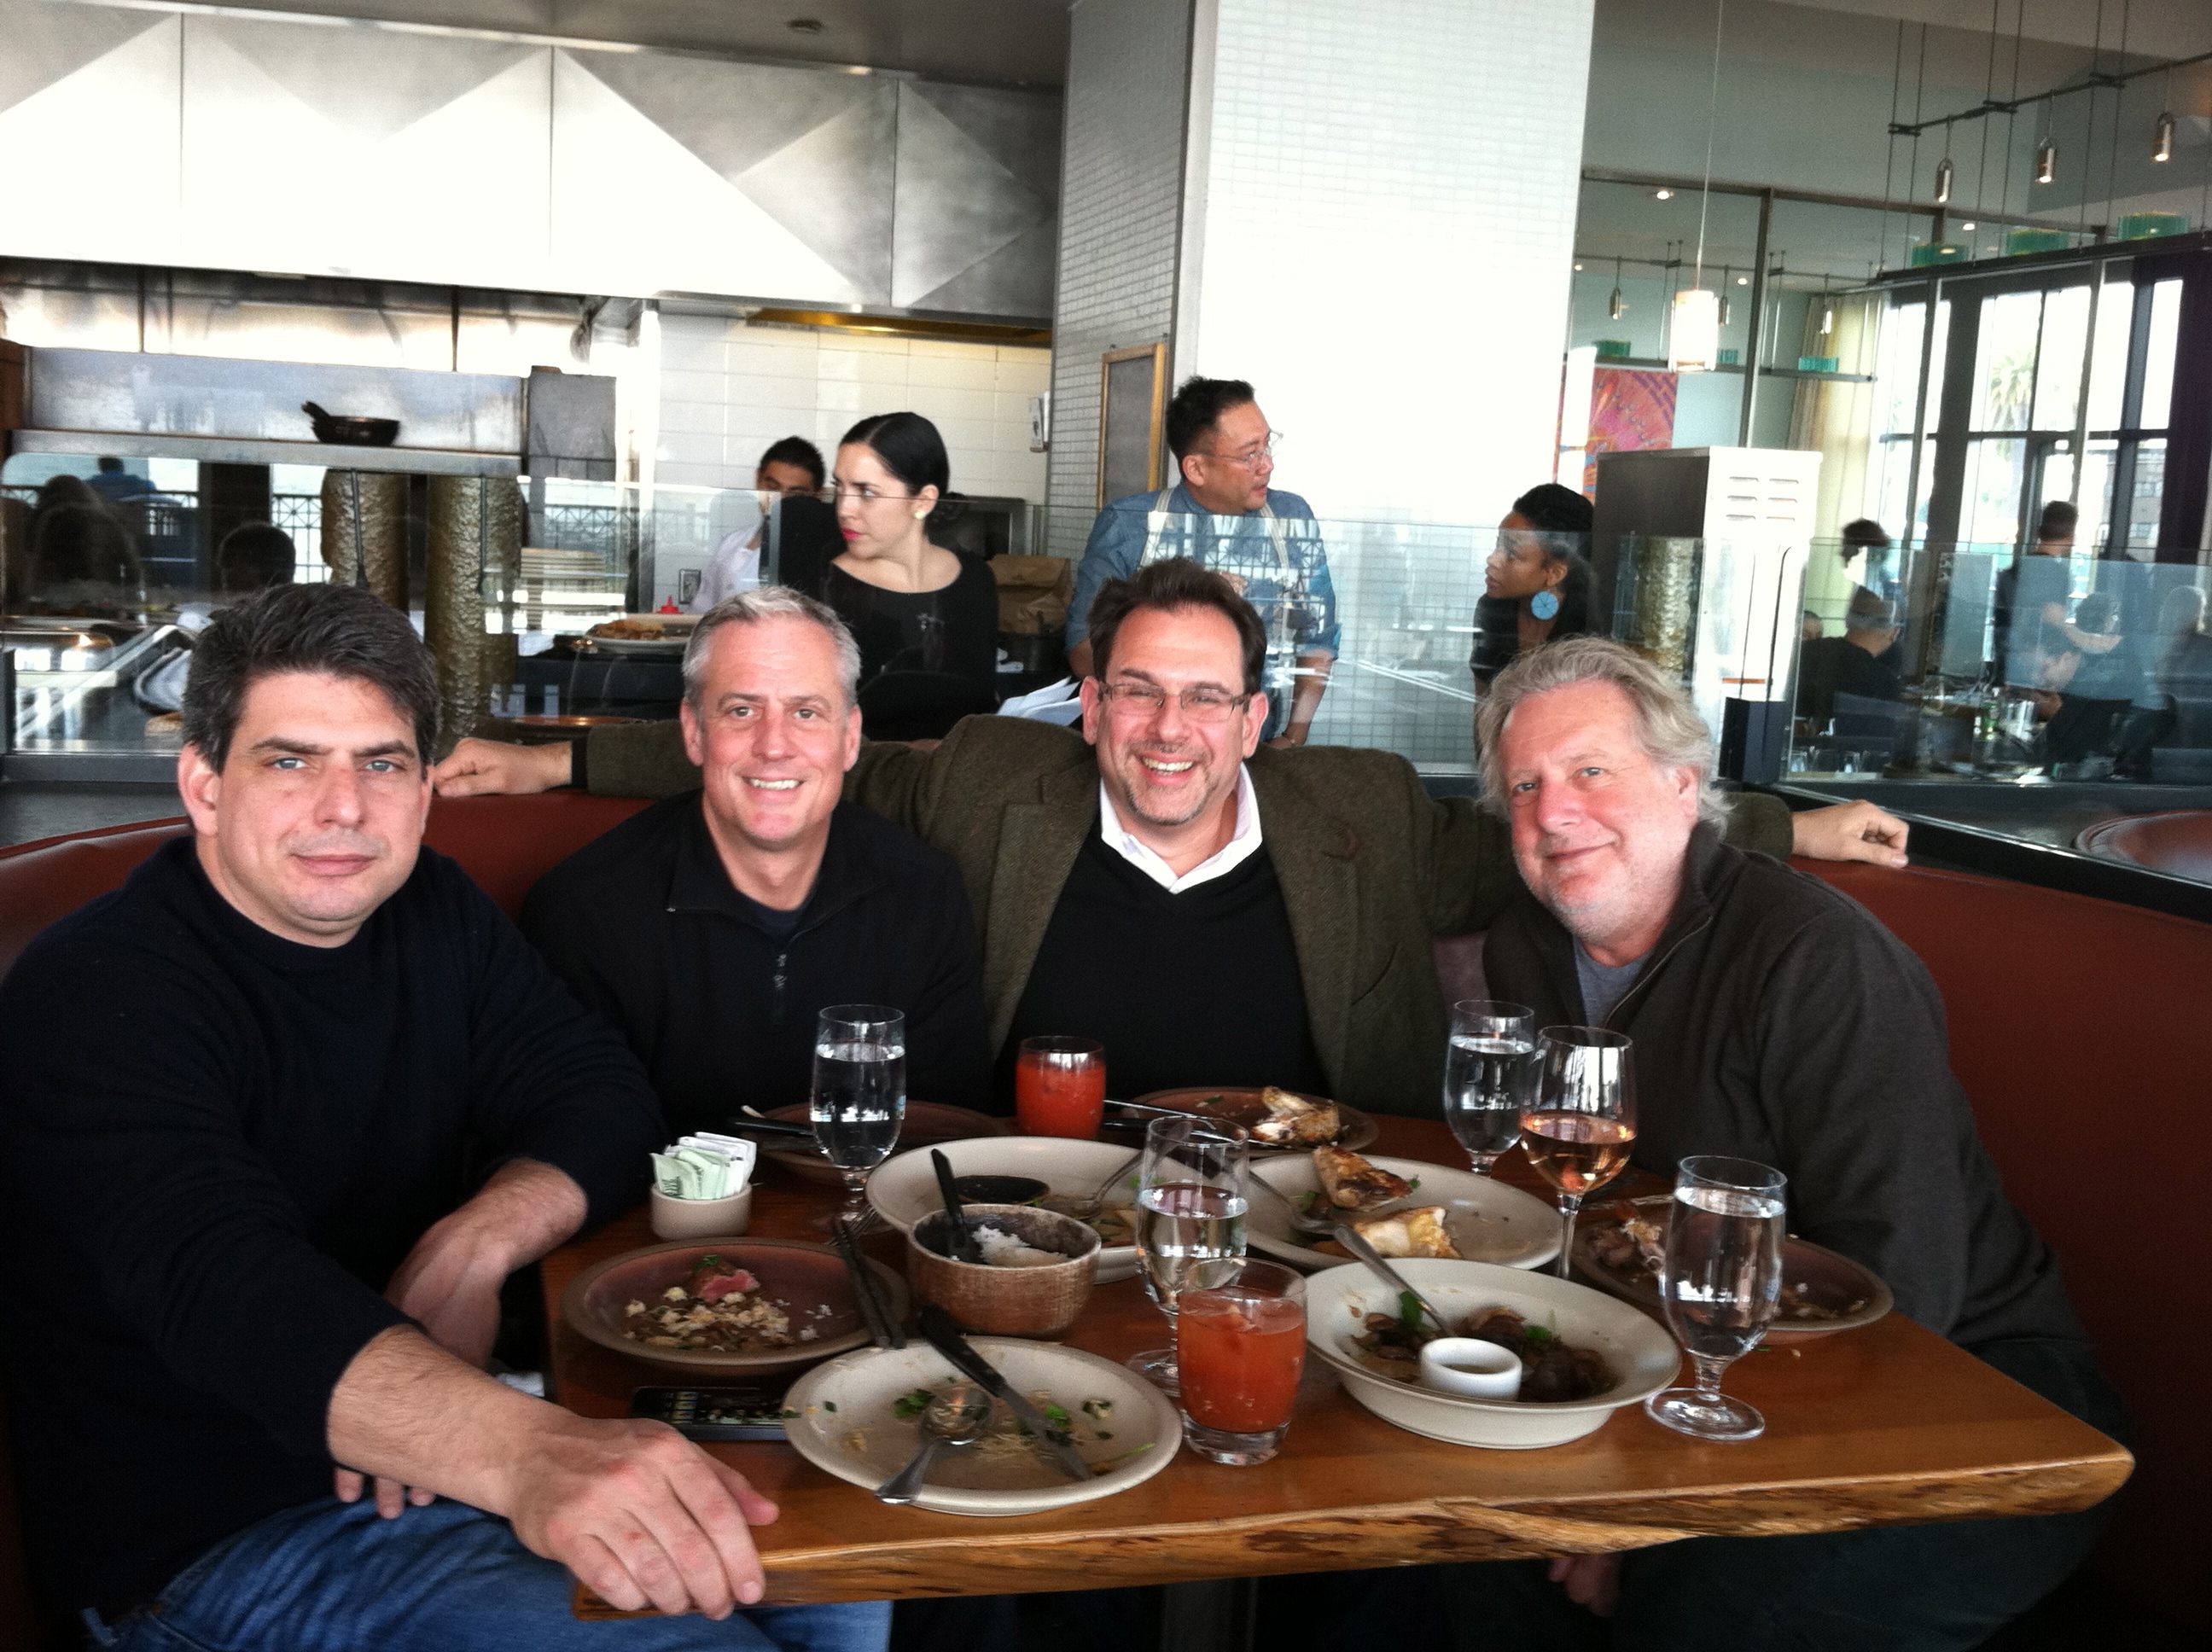 Lunch at Slanted Door, San Francisco, January 2013.  With Joey Campanaro, Jimmy Bradley, and Jonathan Waxman. Why do we look so happy?  Because we're in California!